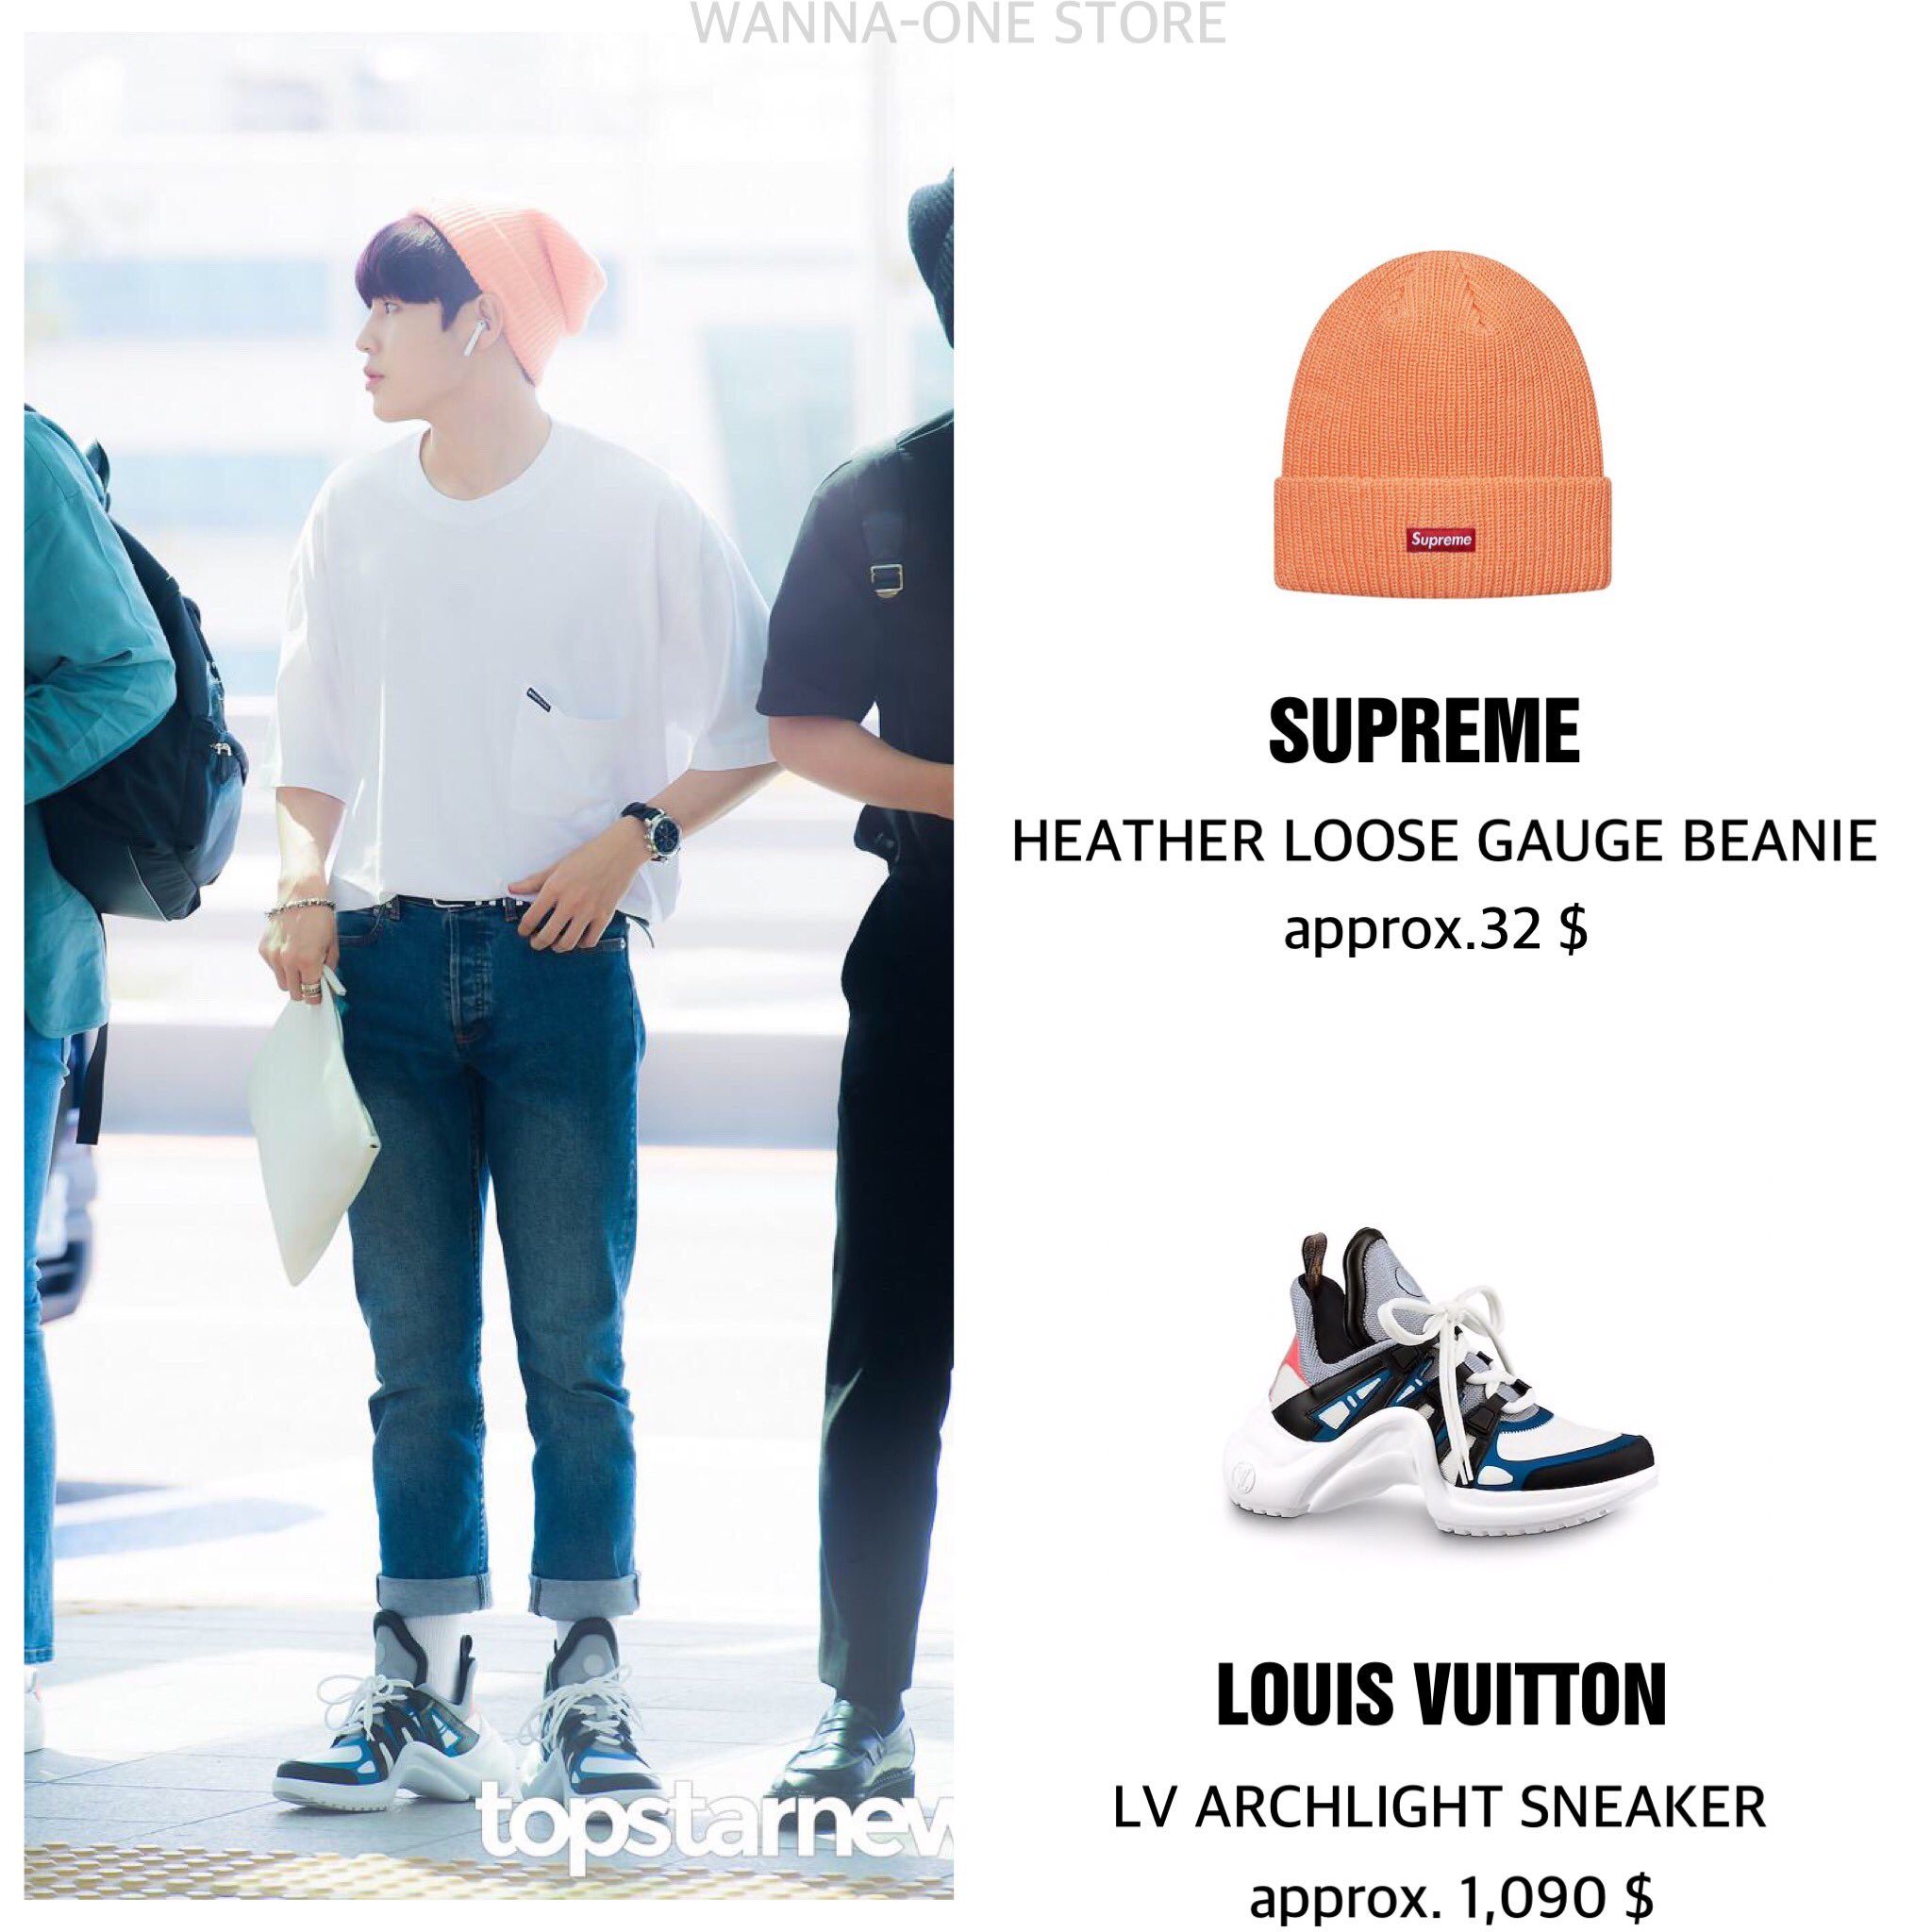 WANNA-ONE STORE on X: SUPREME : HEATHER LOOSE GAUGE BEANIE approx. 32 $  (sold out) LOUIS VUITTON : LV ARCHLIGHT SNEAKER approx. 1,090 $ #하성운 #워너원  #HaSungwoon #WannaOne 👉🏻   / X